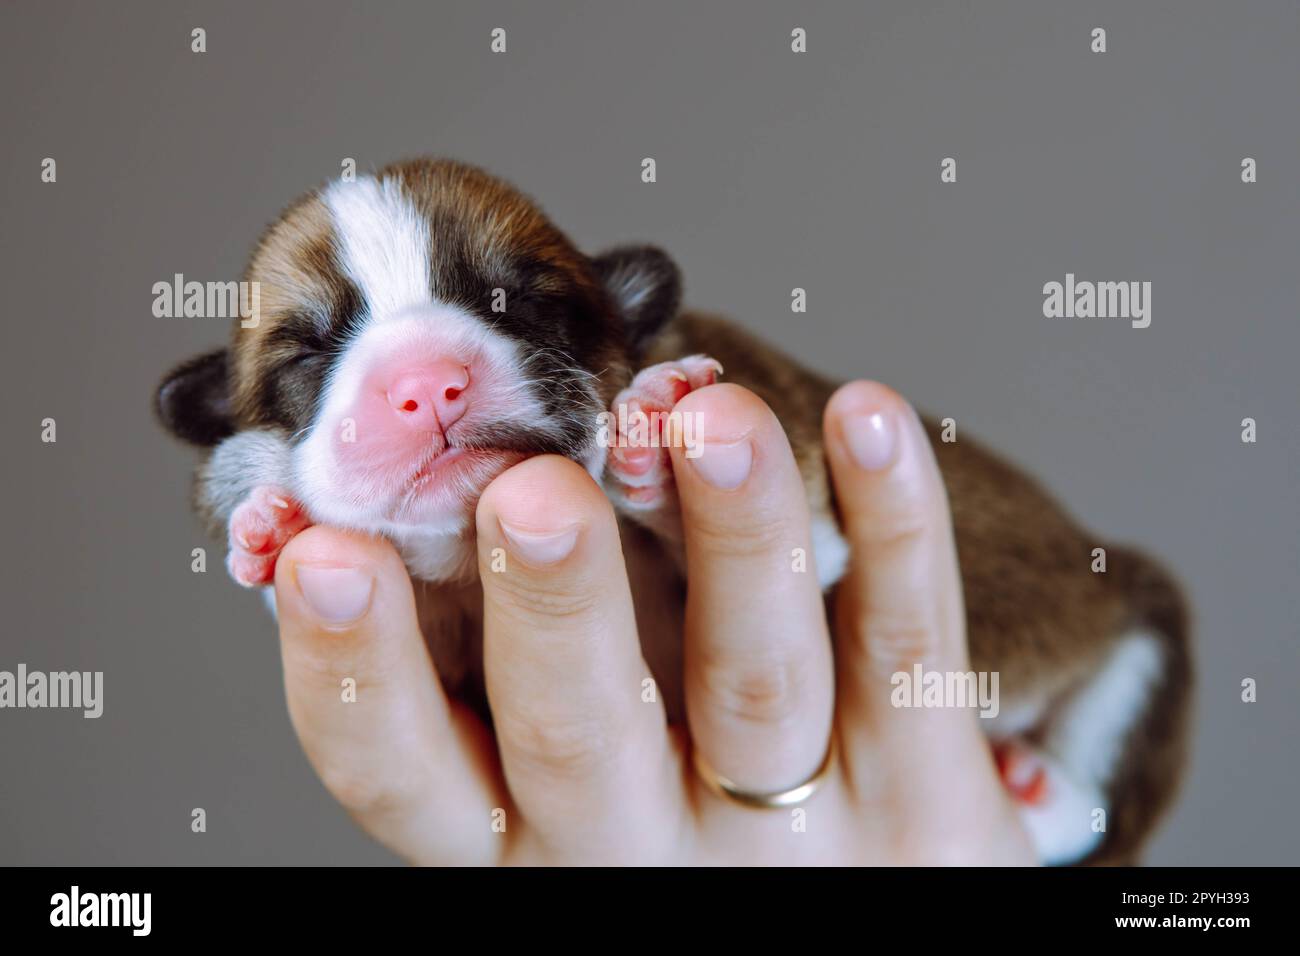 Portrait of adorable two-month-old puppy of dog pembroke welsh corgi sleeping resting on hand of unrecognizable woman. Stock Photo